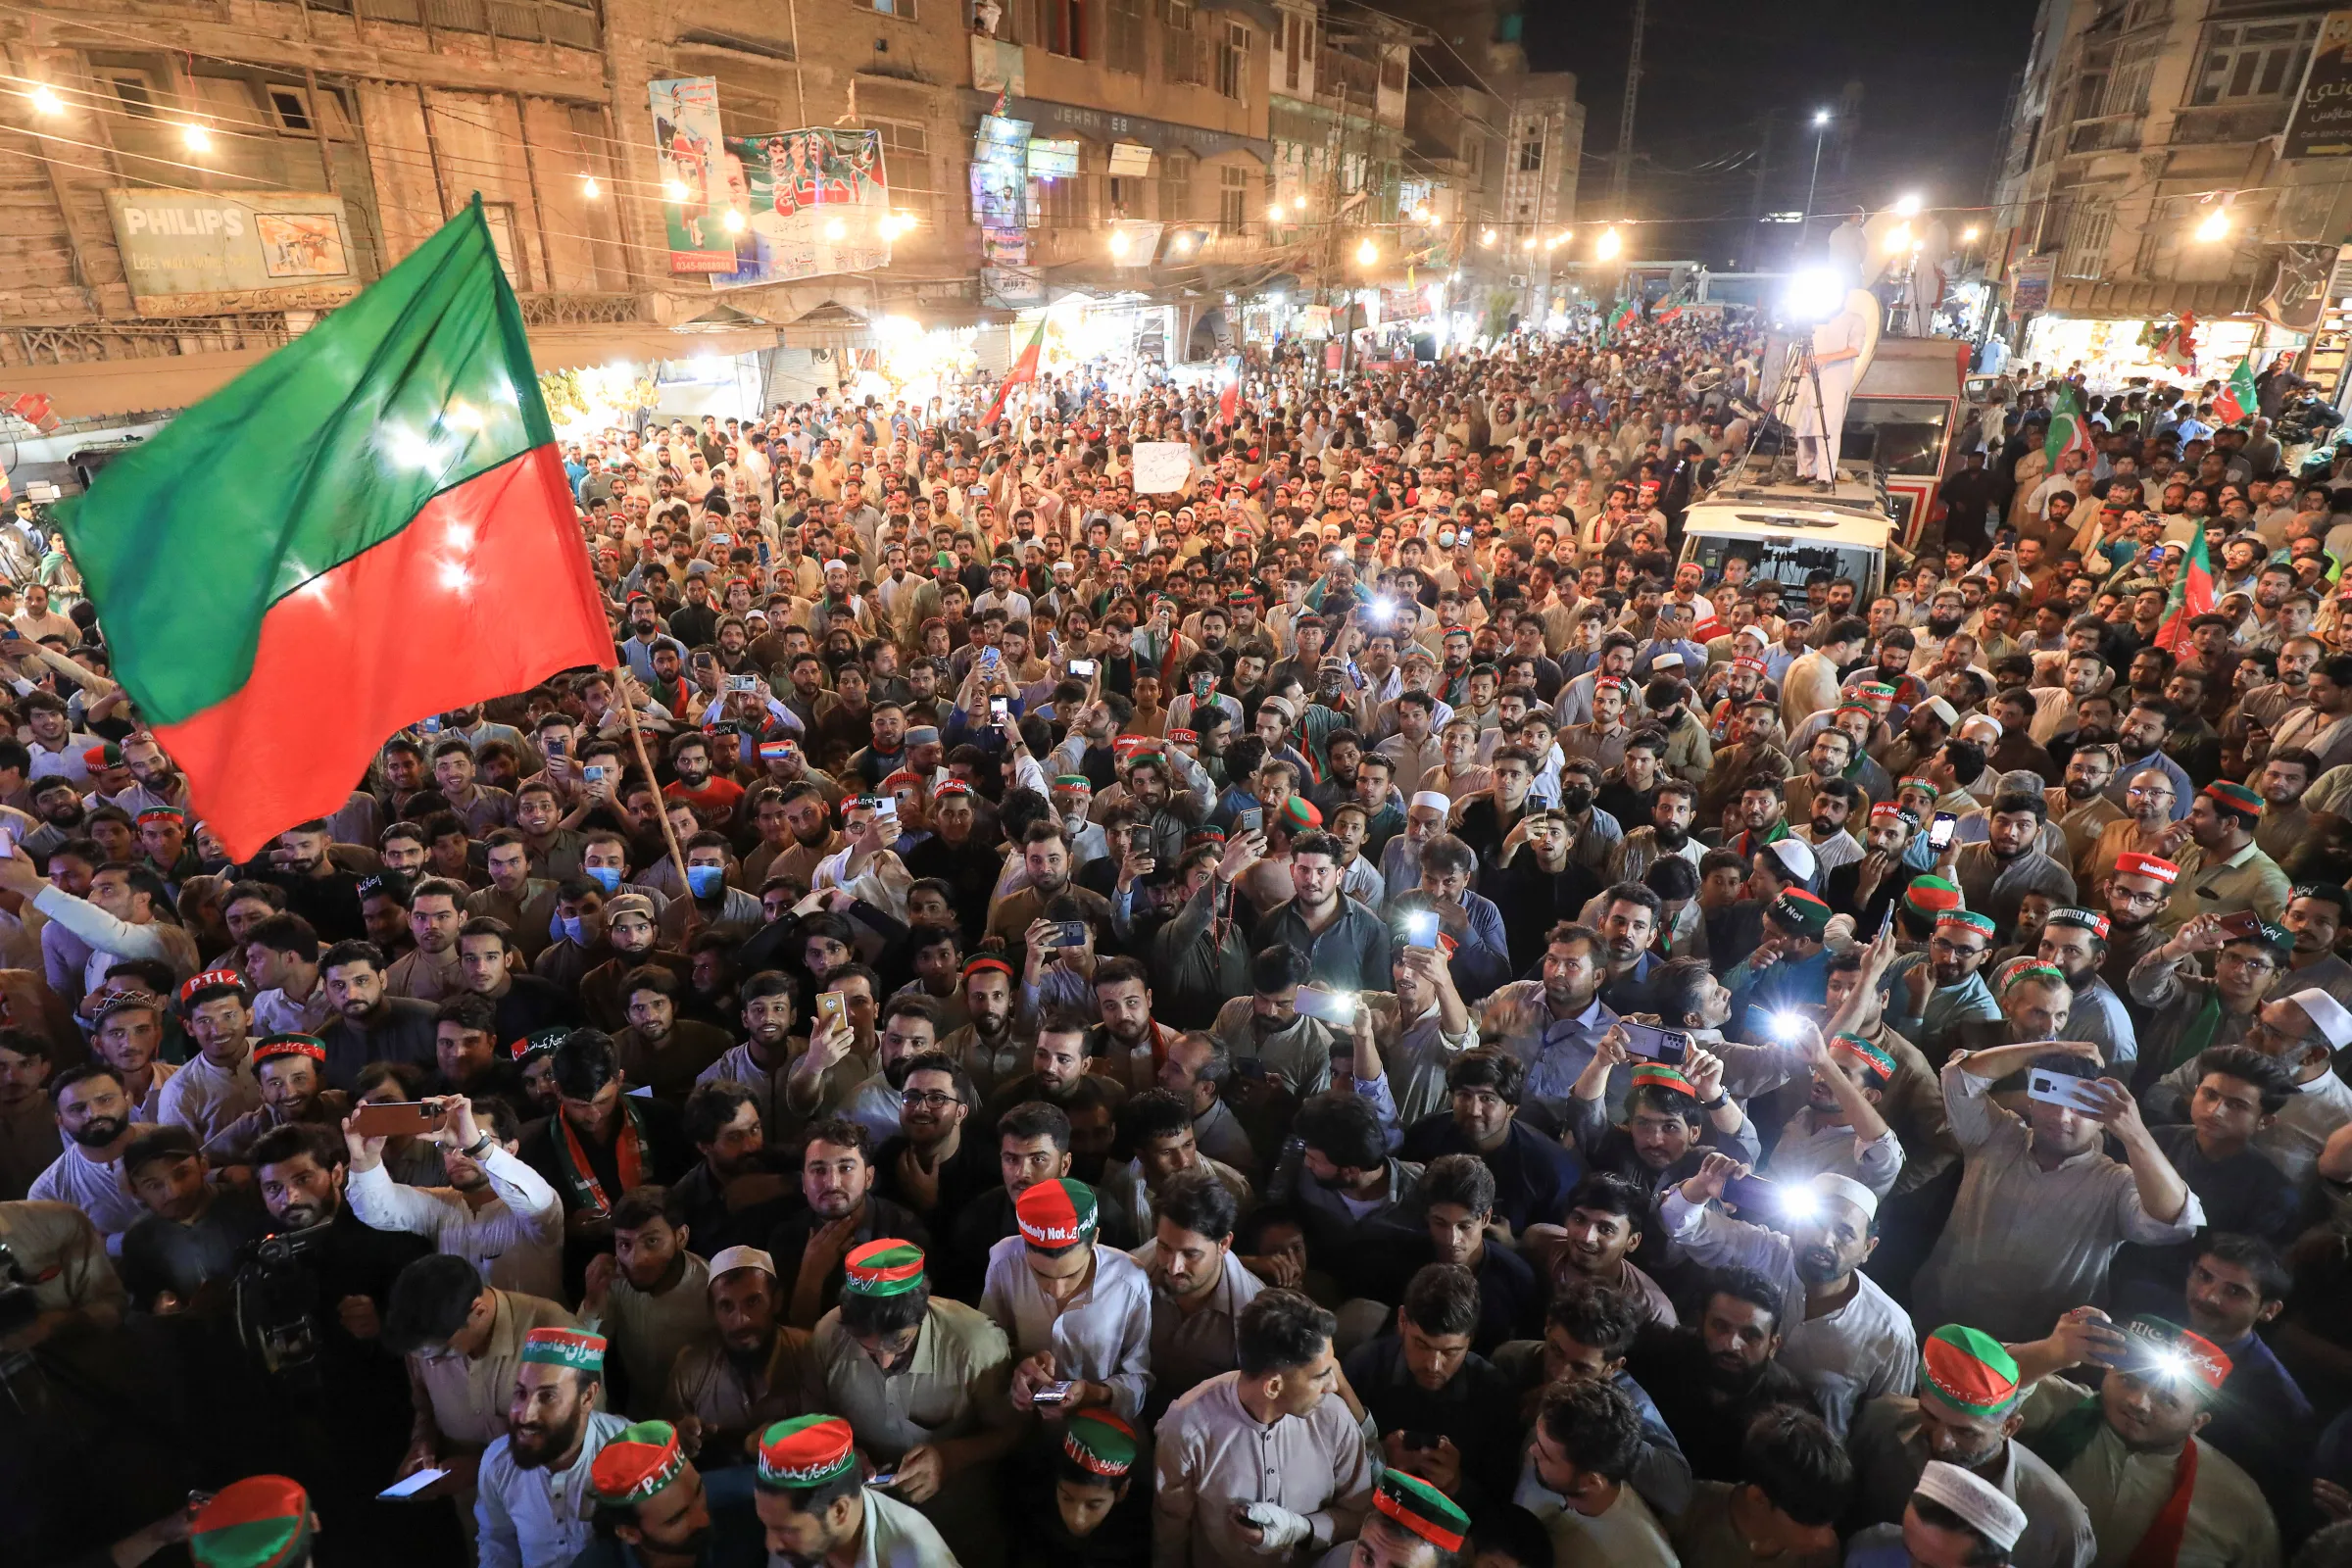 Supporters of the Pakistan Tehreek-e-Insaf (PTI) political party gather to listen the virtual address of the ousted Prime Minister Imran Khan, during a countrywide protest on inflation, in Peshawar, Pakistan June 19, 2022. Picture taken June 19, 2022. REUTERS/Fayaz Aziz